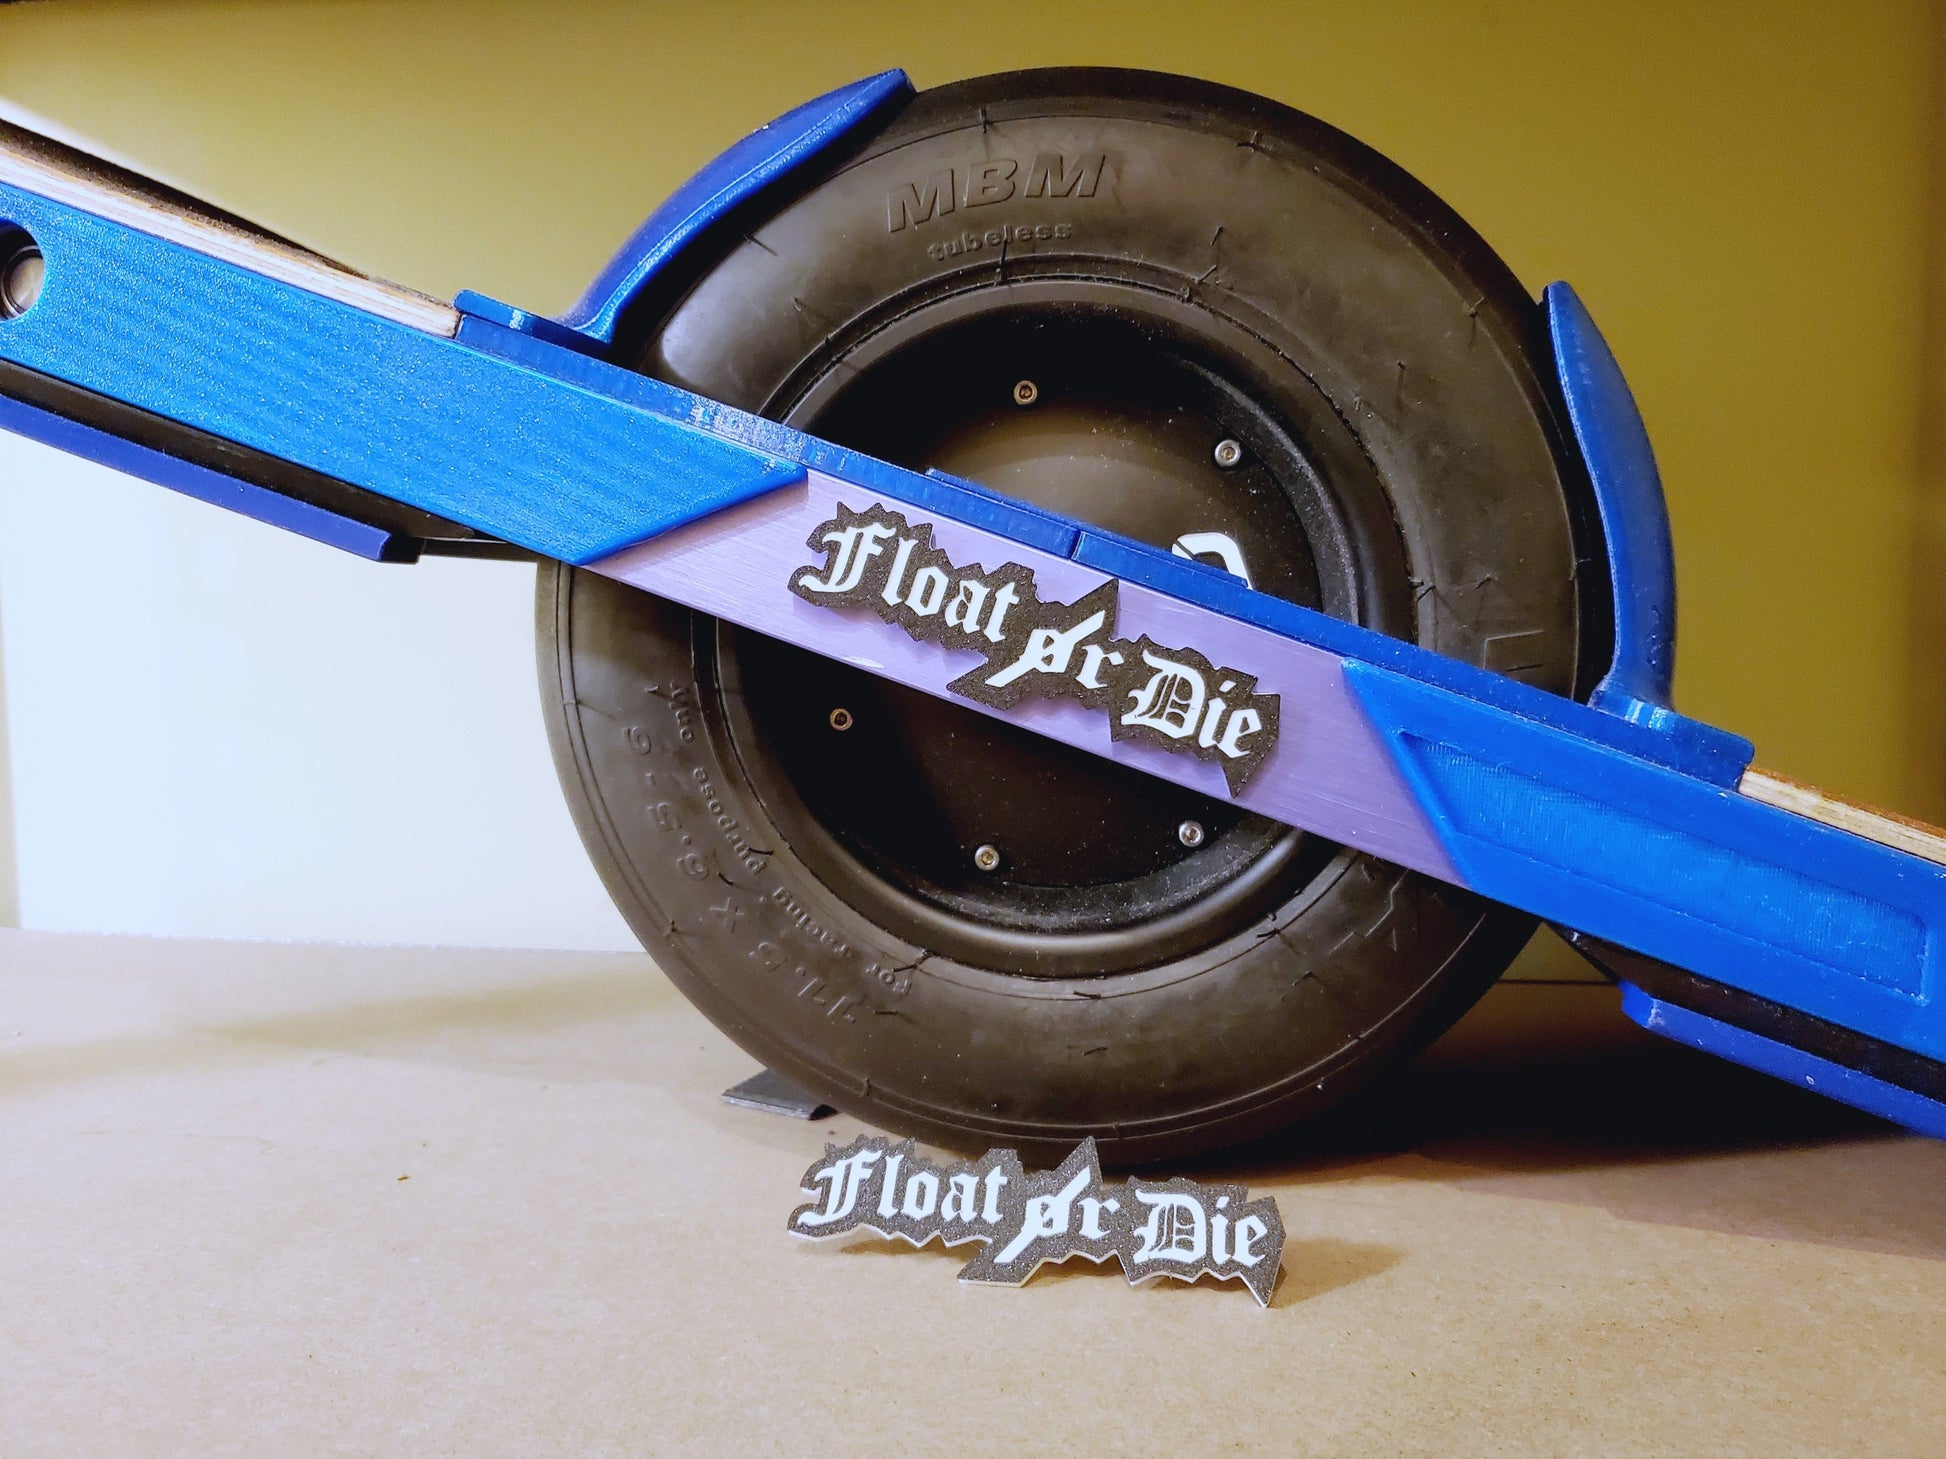 Axle Plug for Onewheel XR | Onewheel Accessory | Float or Die Edition - FloaterShack